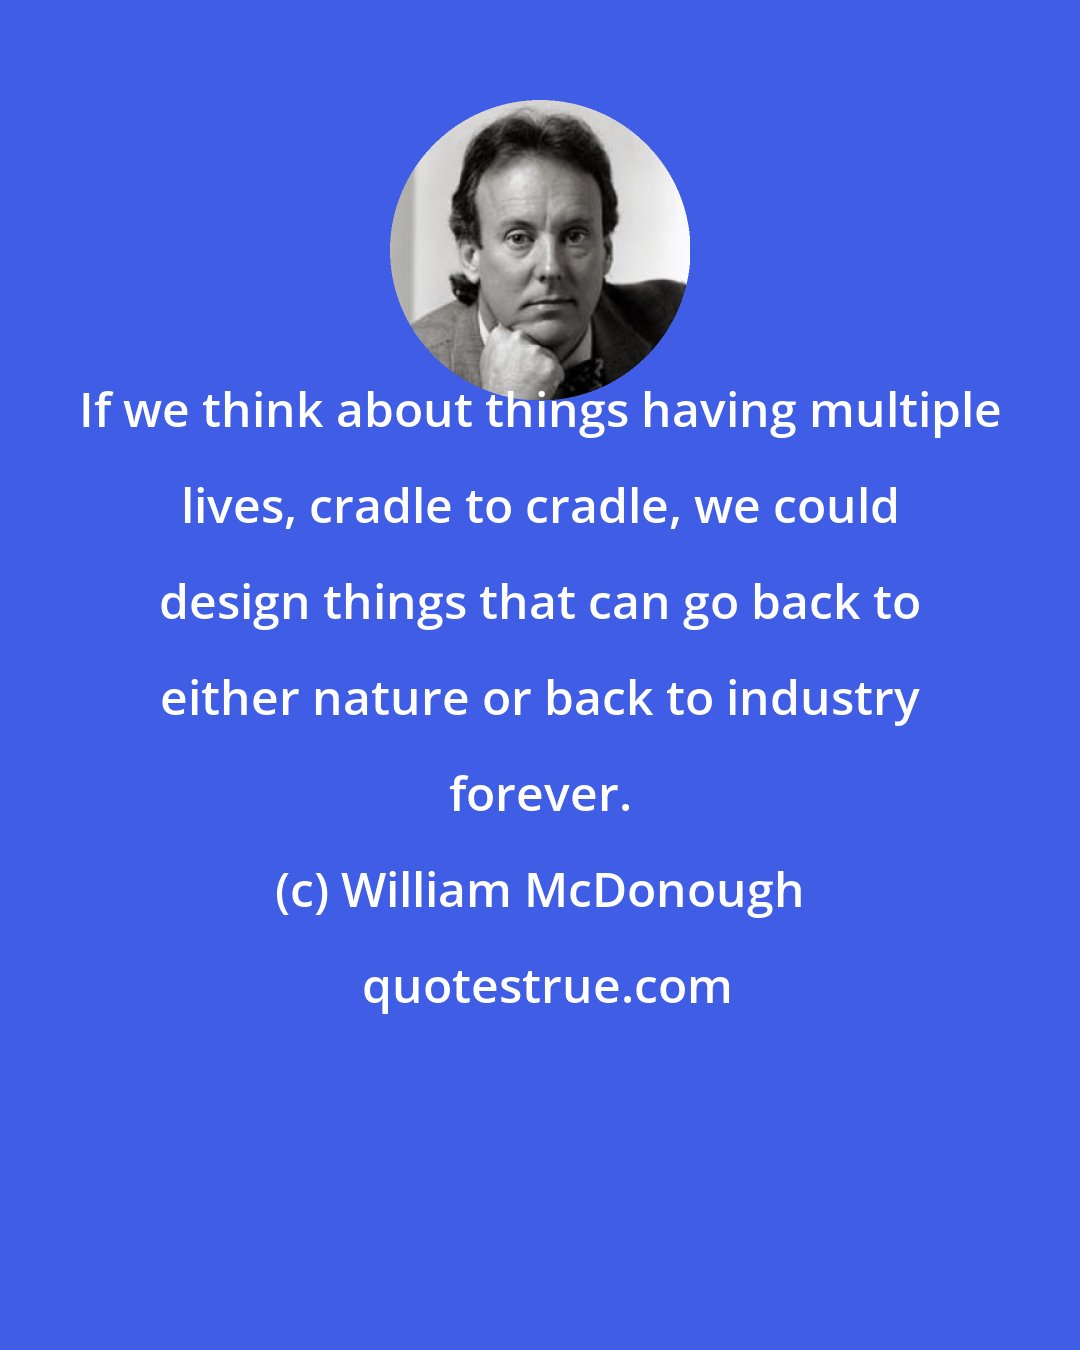 William McDonough: If we think about things having multiple lives, cradle to cradle, we could design things that can go back to either nature or back to industry forever.